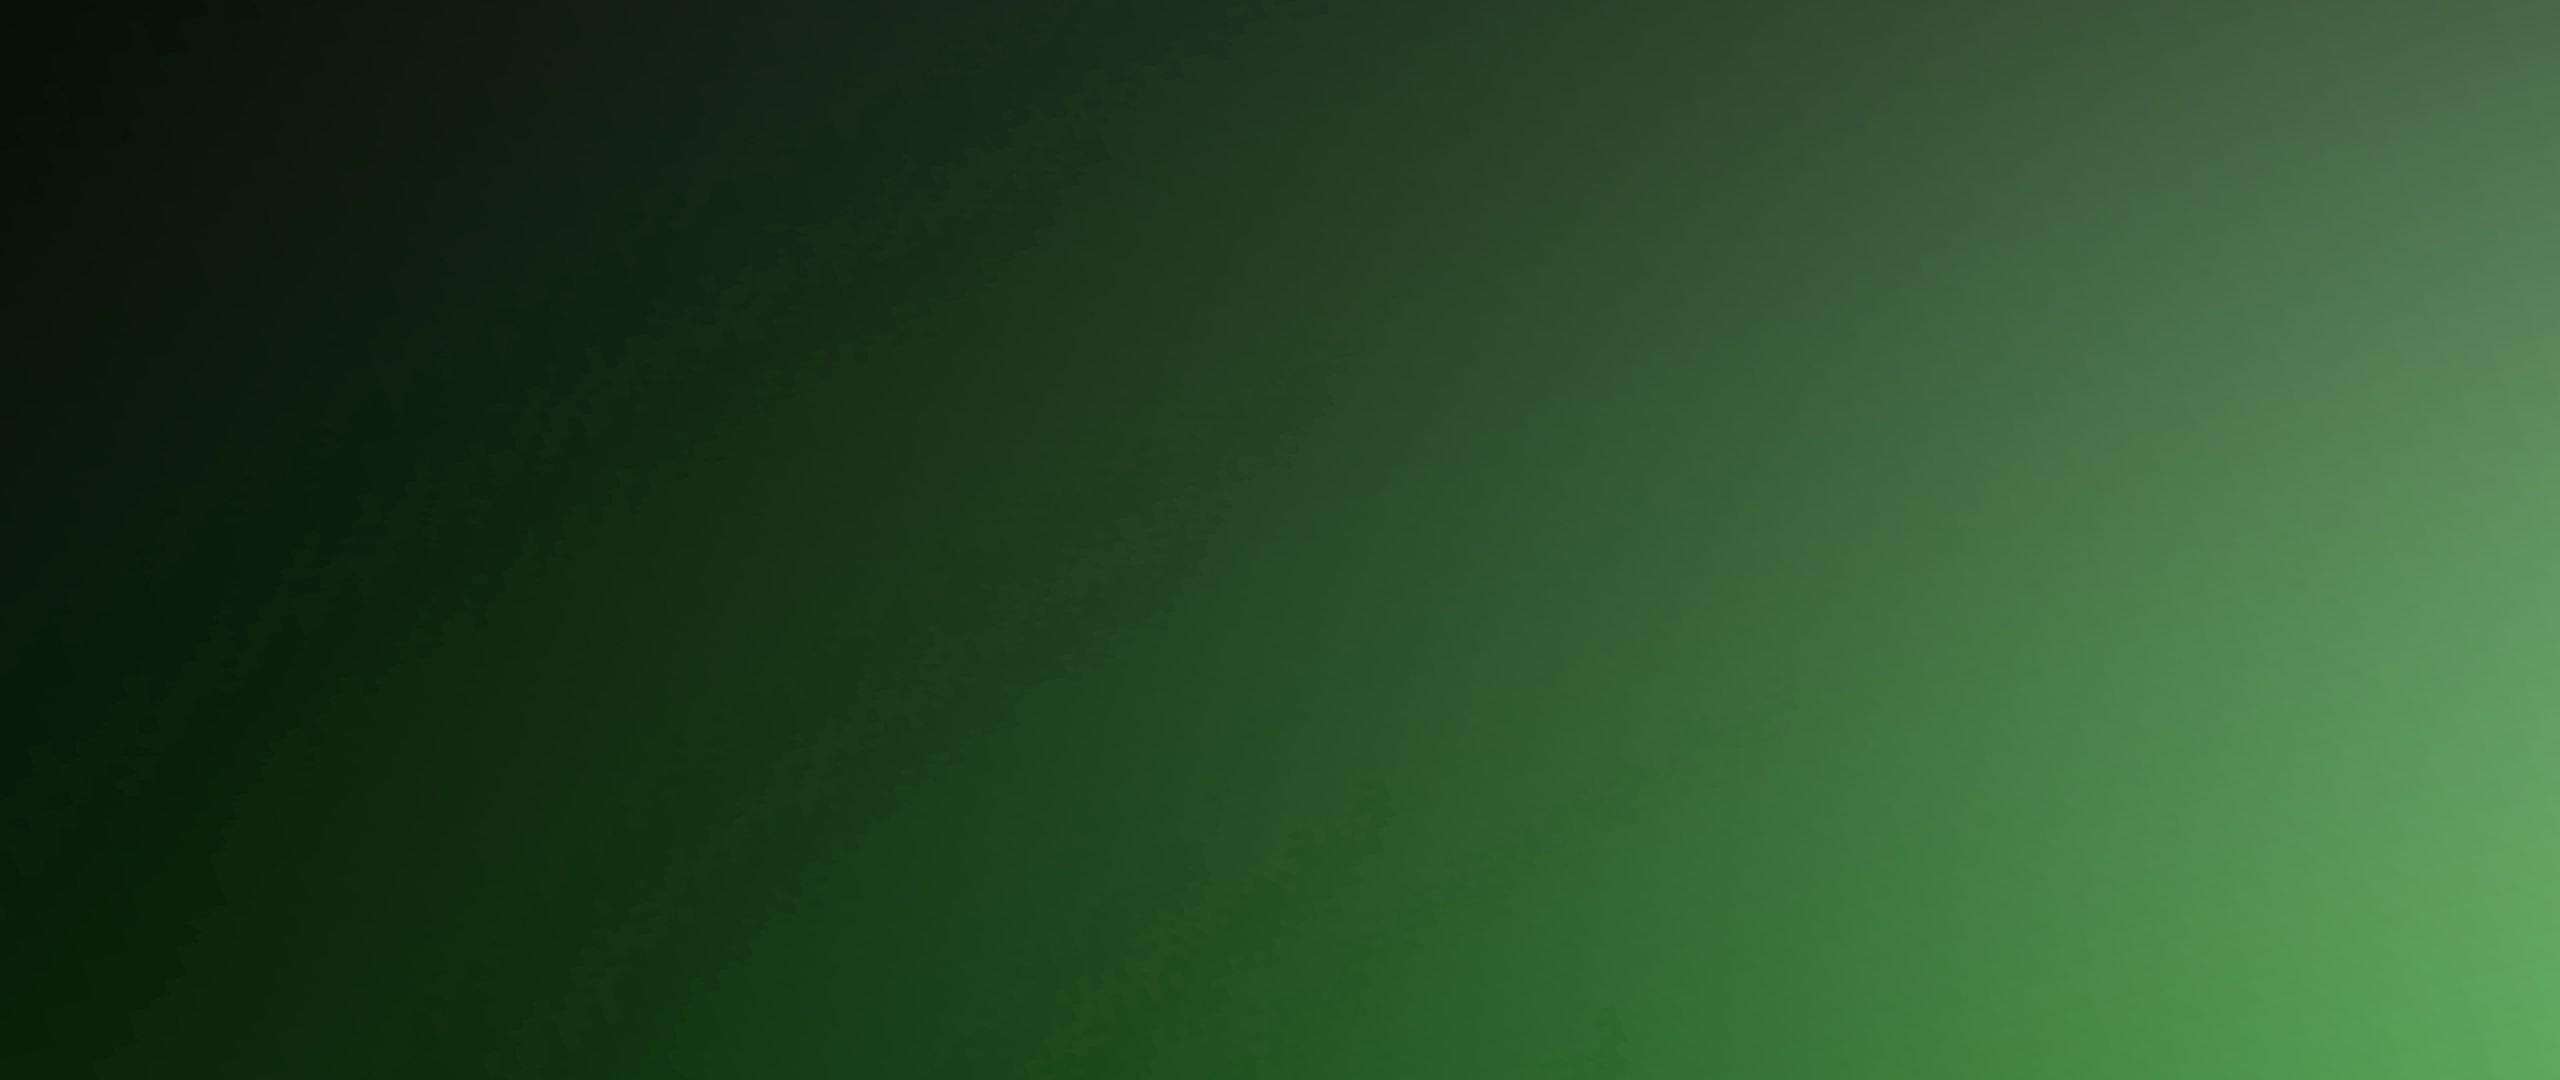 Download wallpaper 2560x1080 green, background, texture, solid, color ...